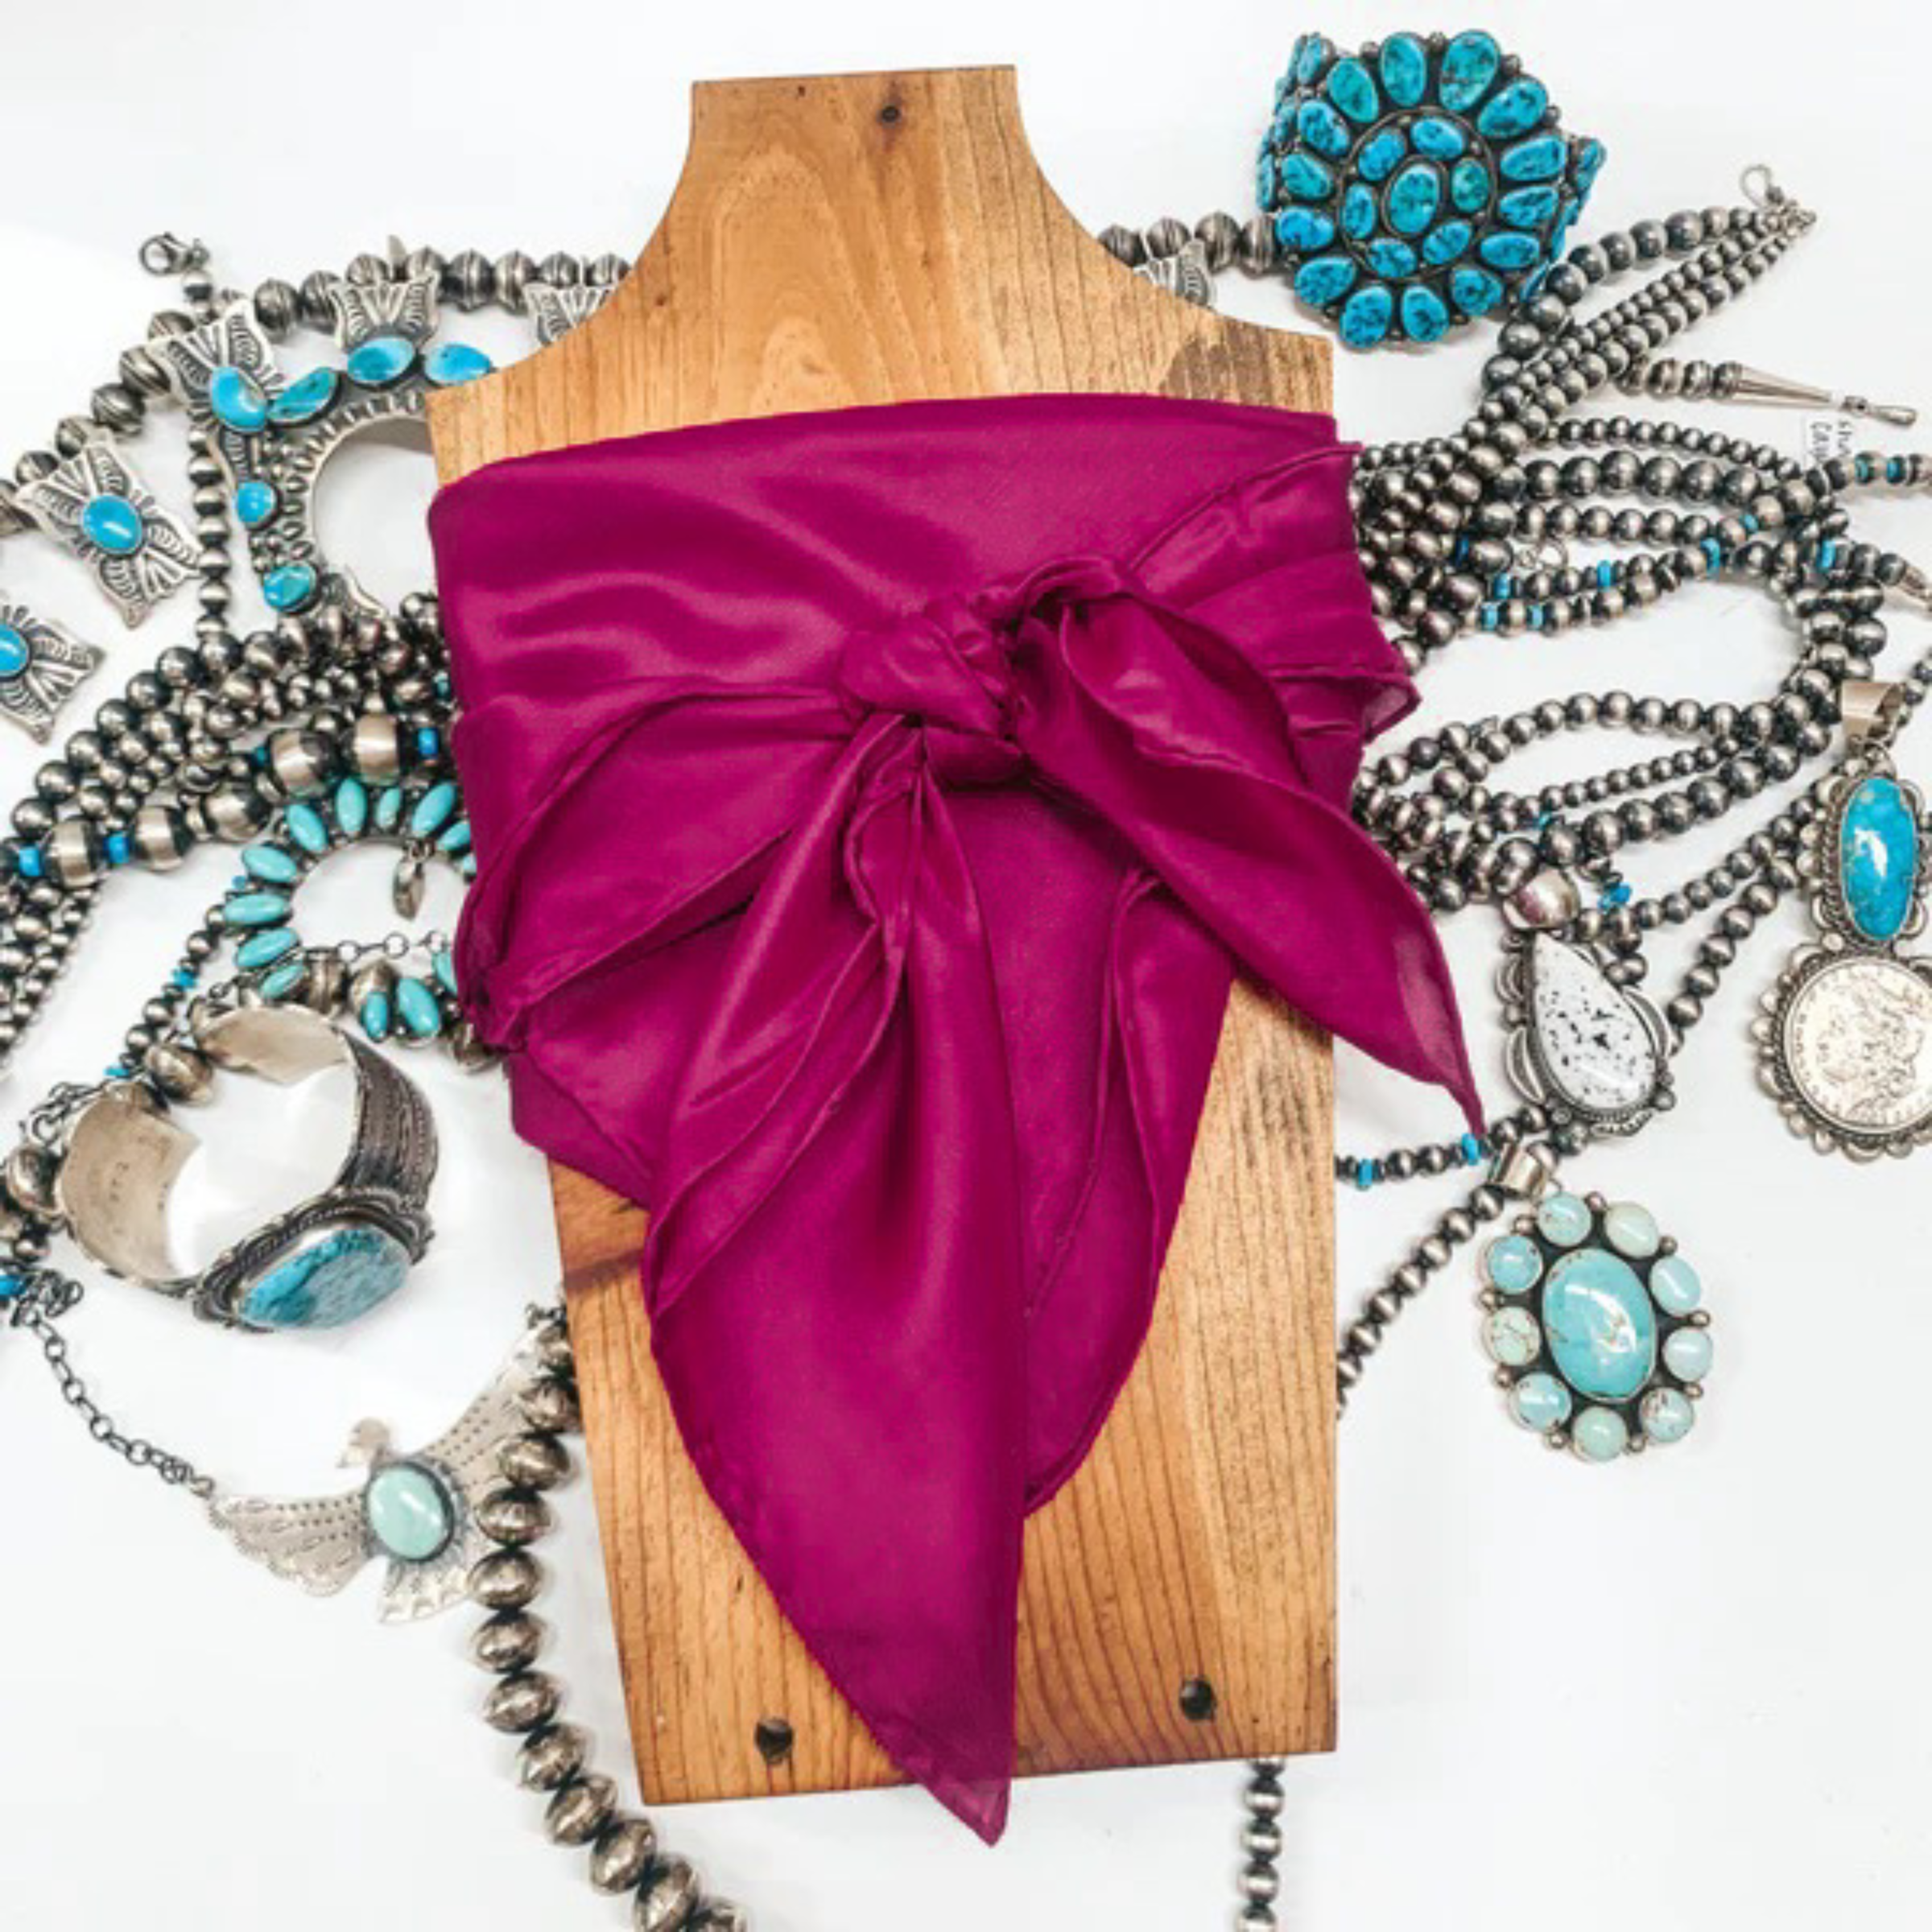 This is a fuchsia silk wild rag, this wild rag is pictured wrapped around a brown necklace board. This wild rag is pictured on a white background and with silver and turquoise Navajo jewelry behind it as decoration.